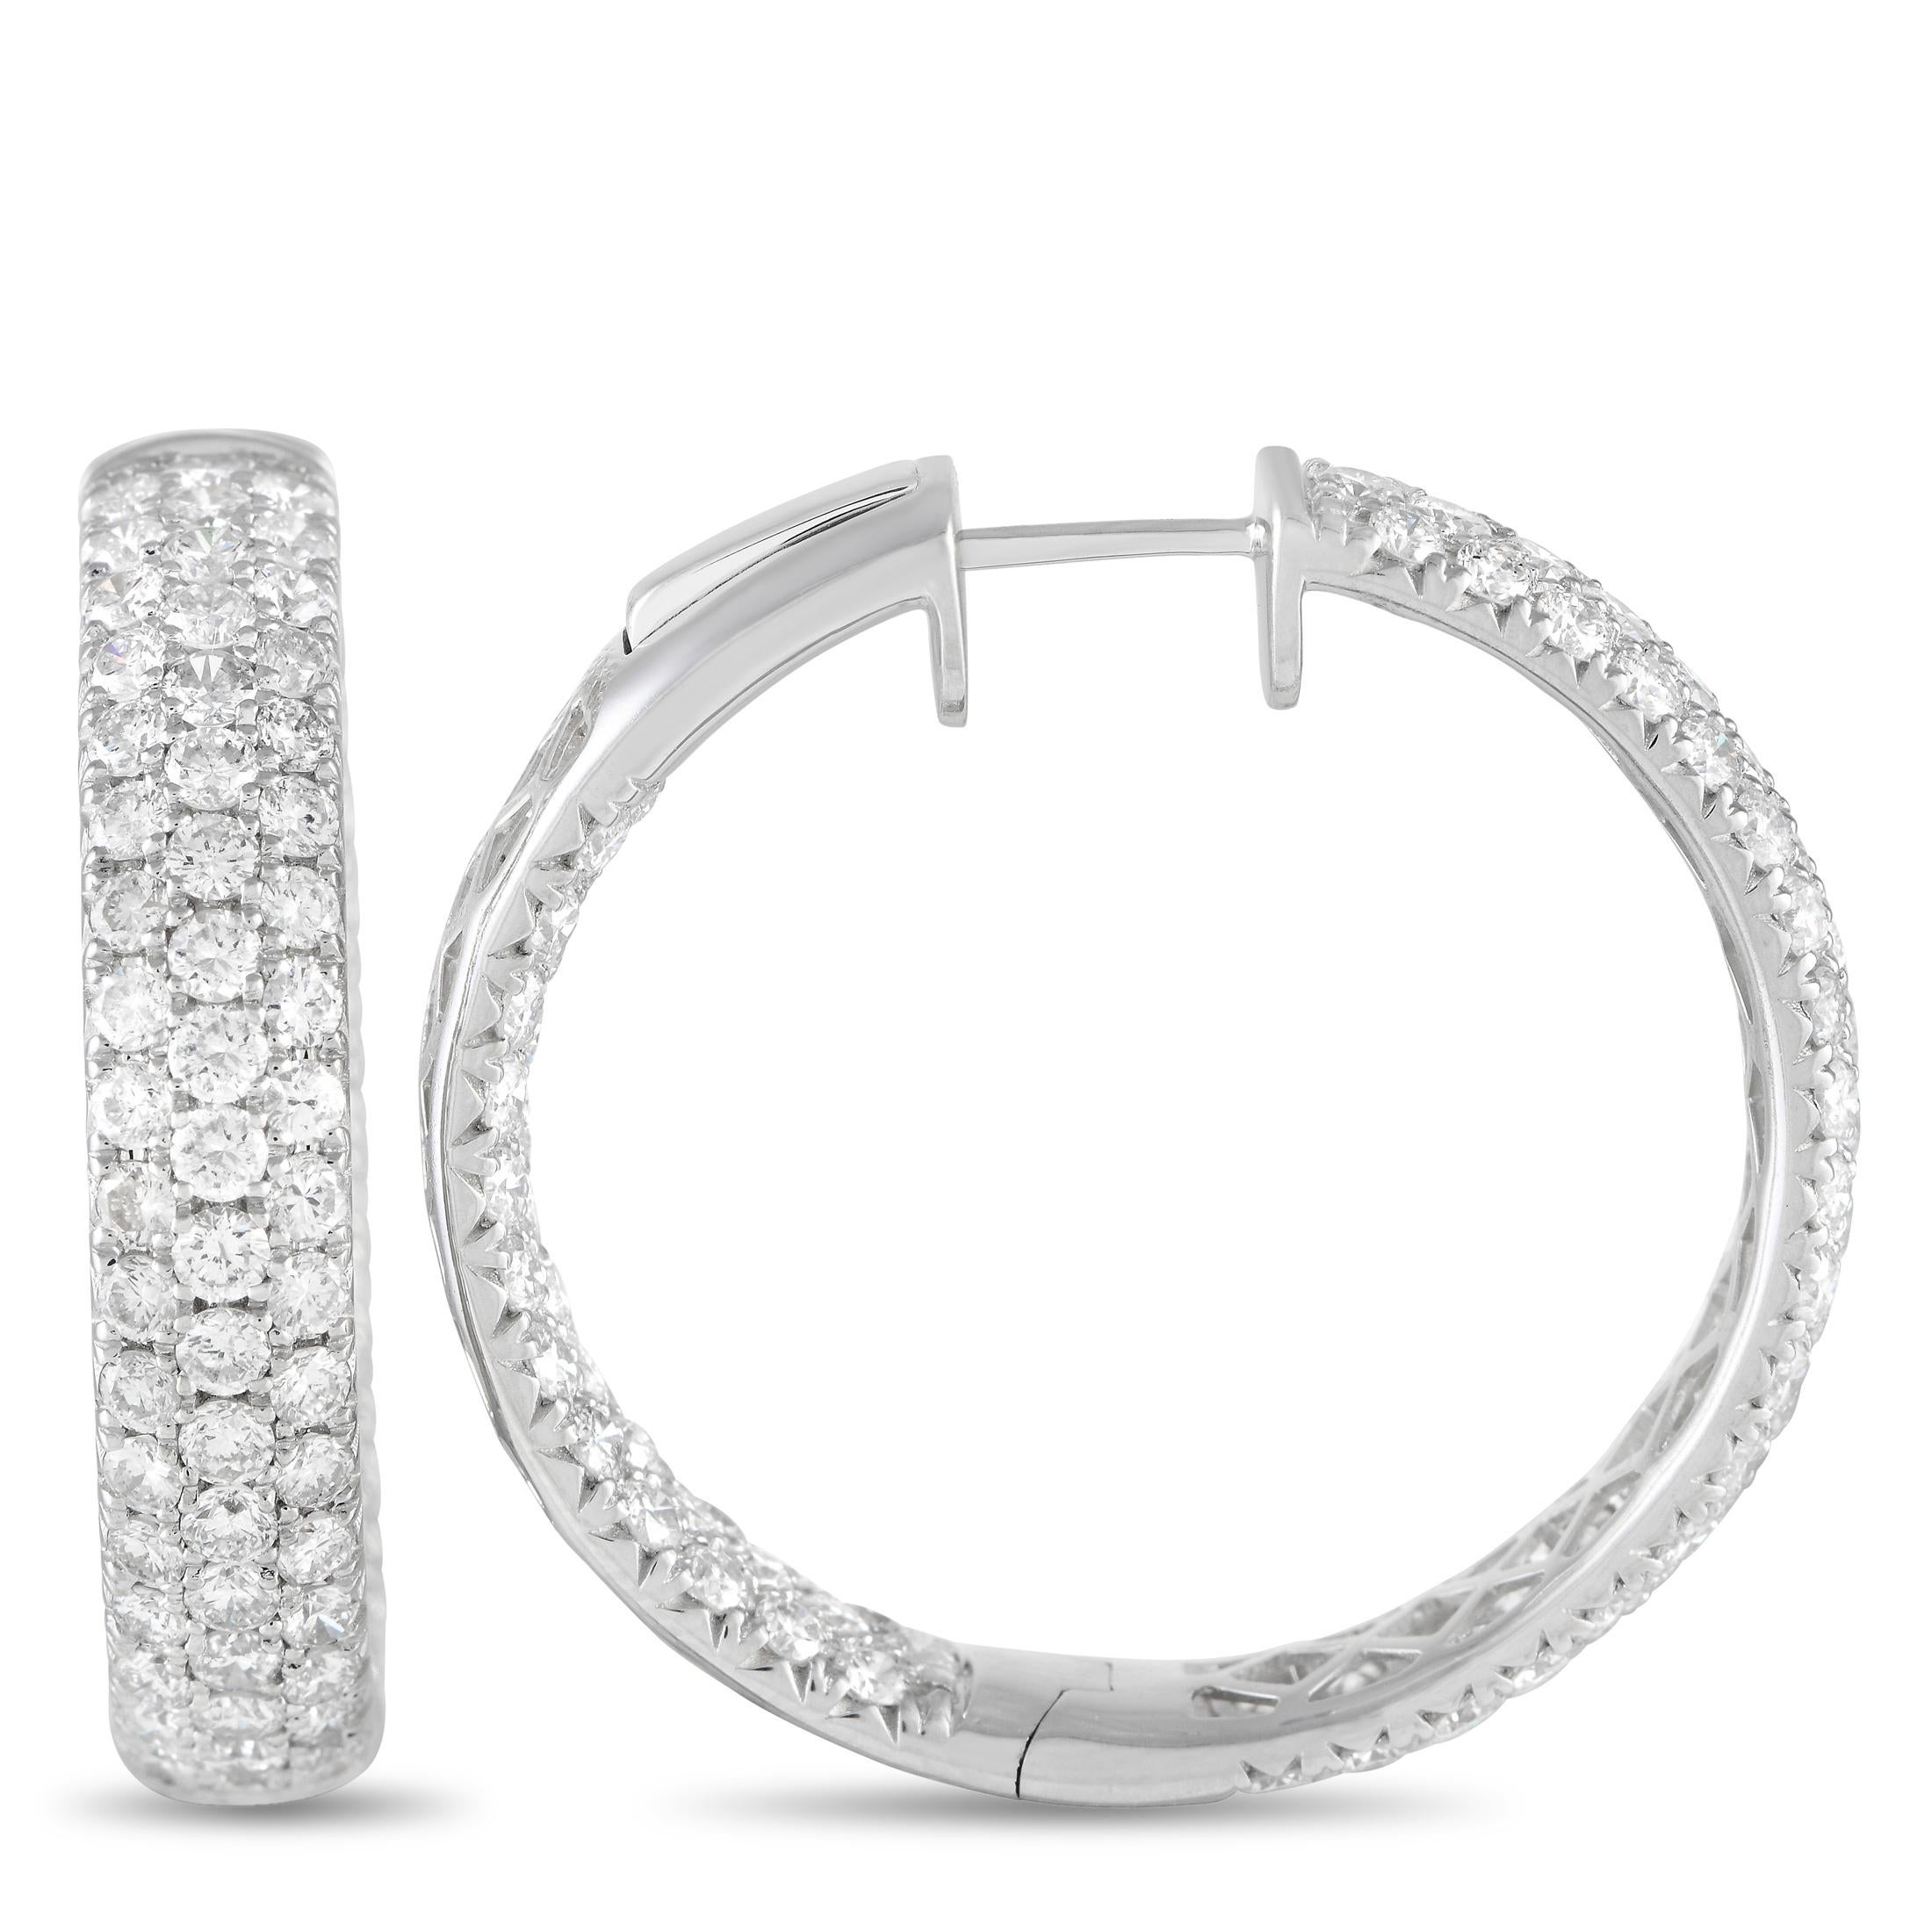 These hoops promise maximum sparkle. Each white gold hoop earring measures 1.25